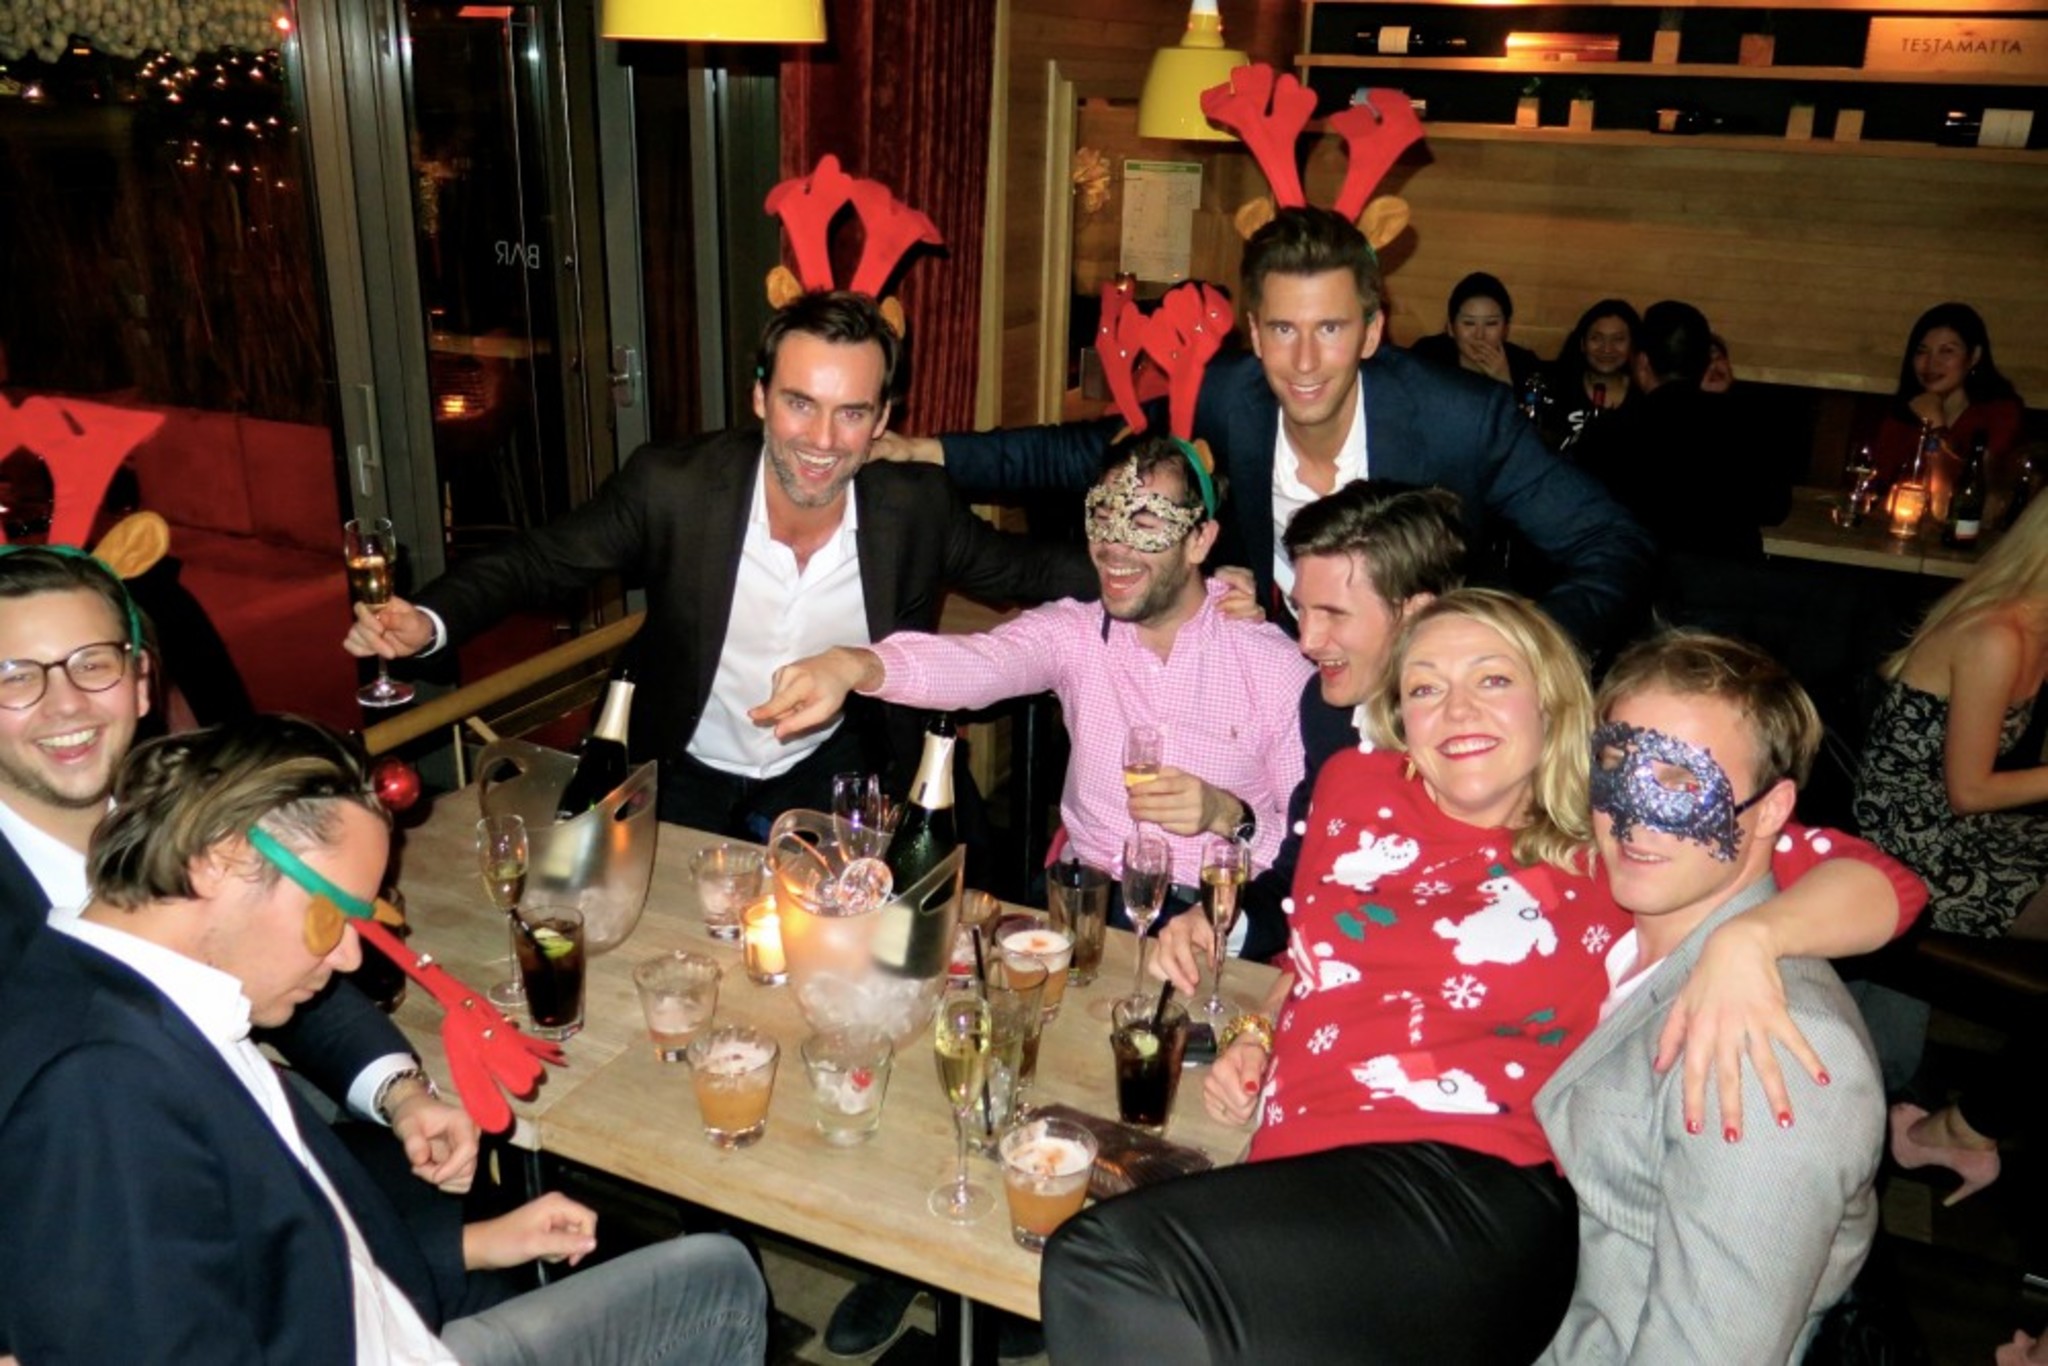 Xmas table Party is nothing without crashing another "hunk-bachelor" Xmas Party!